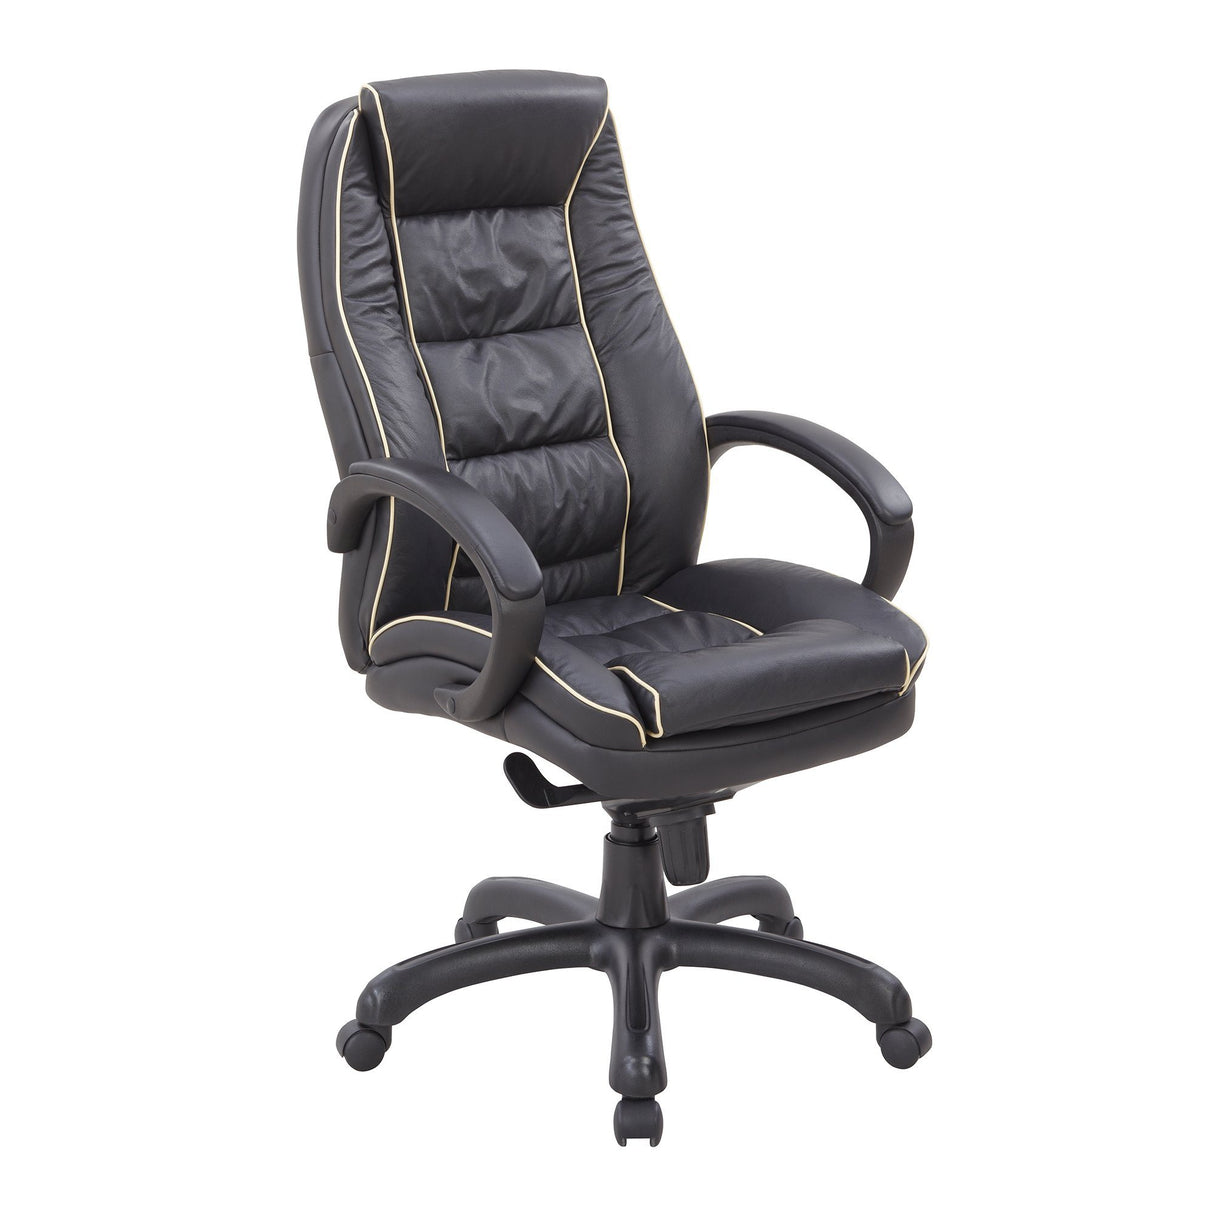 Nautilus Designs Truro High Back Leather Faced Executive Armchair with Contrasting Piping - Black